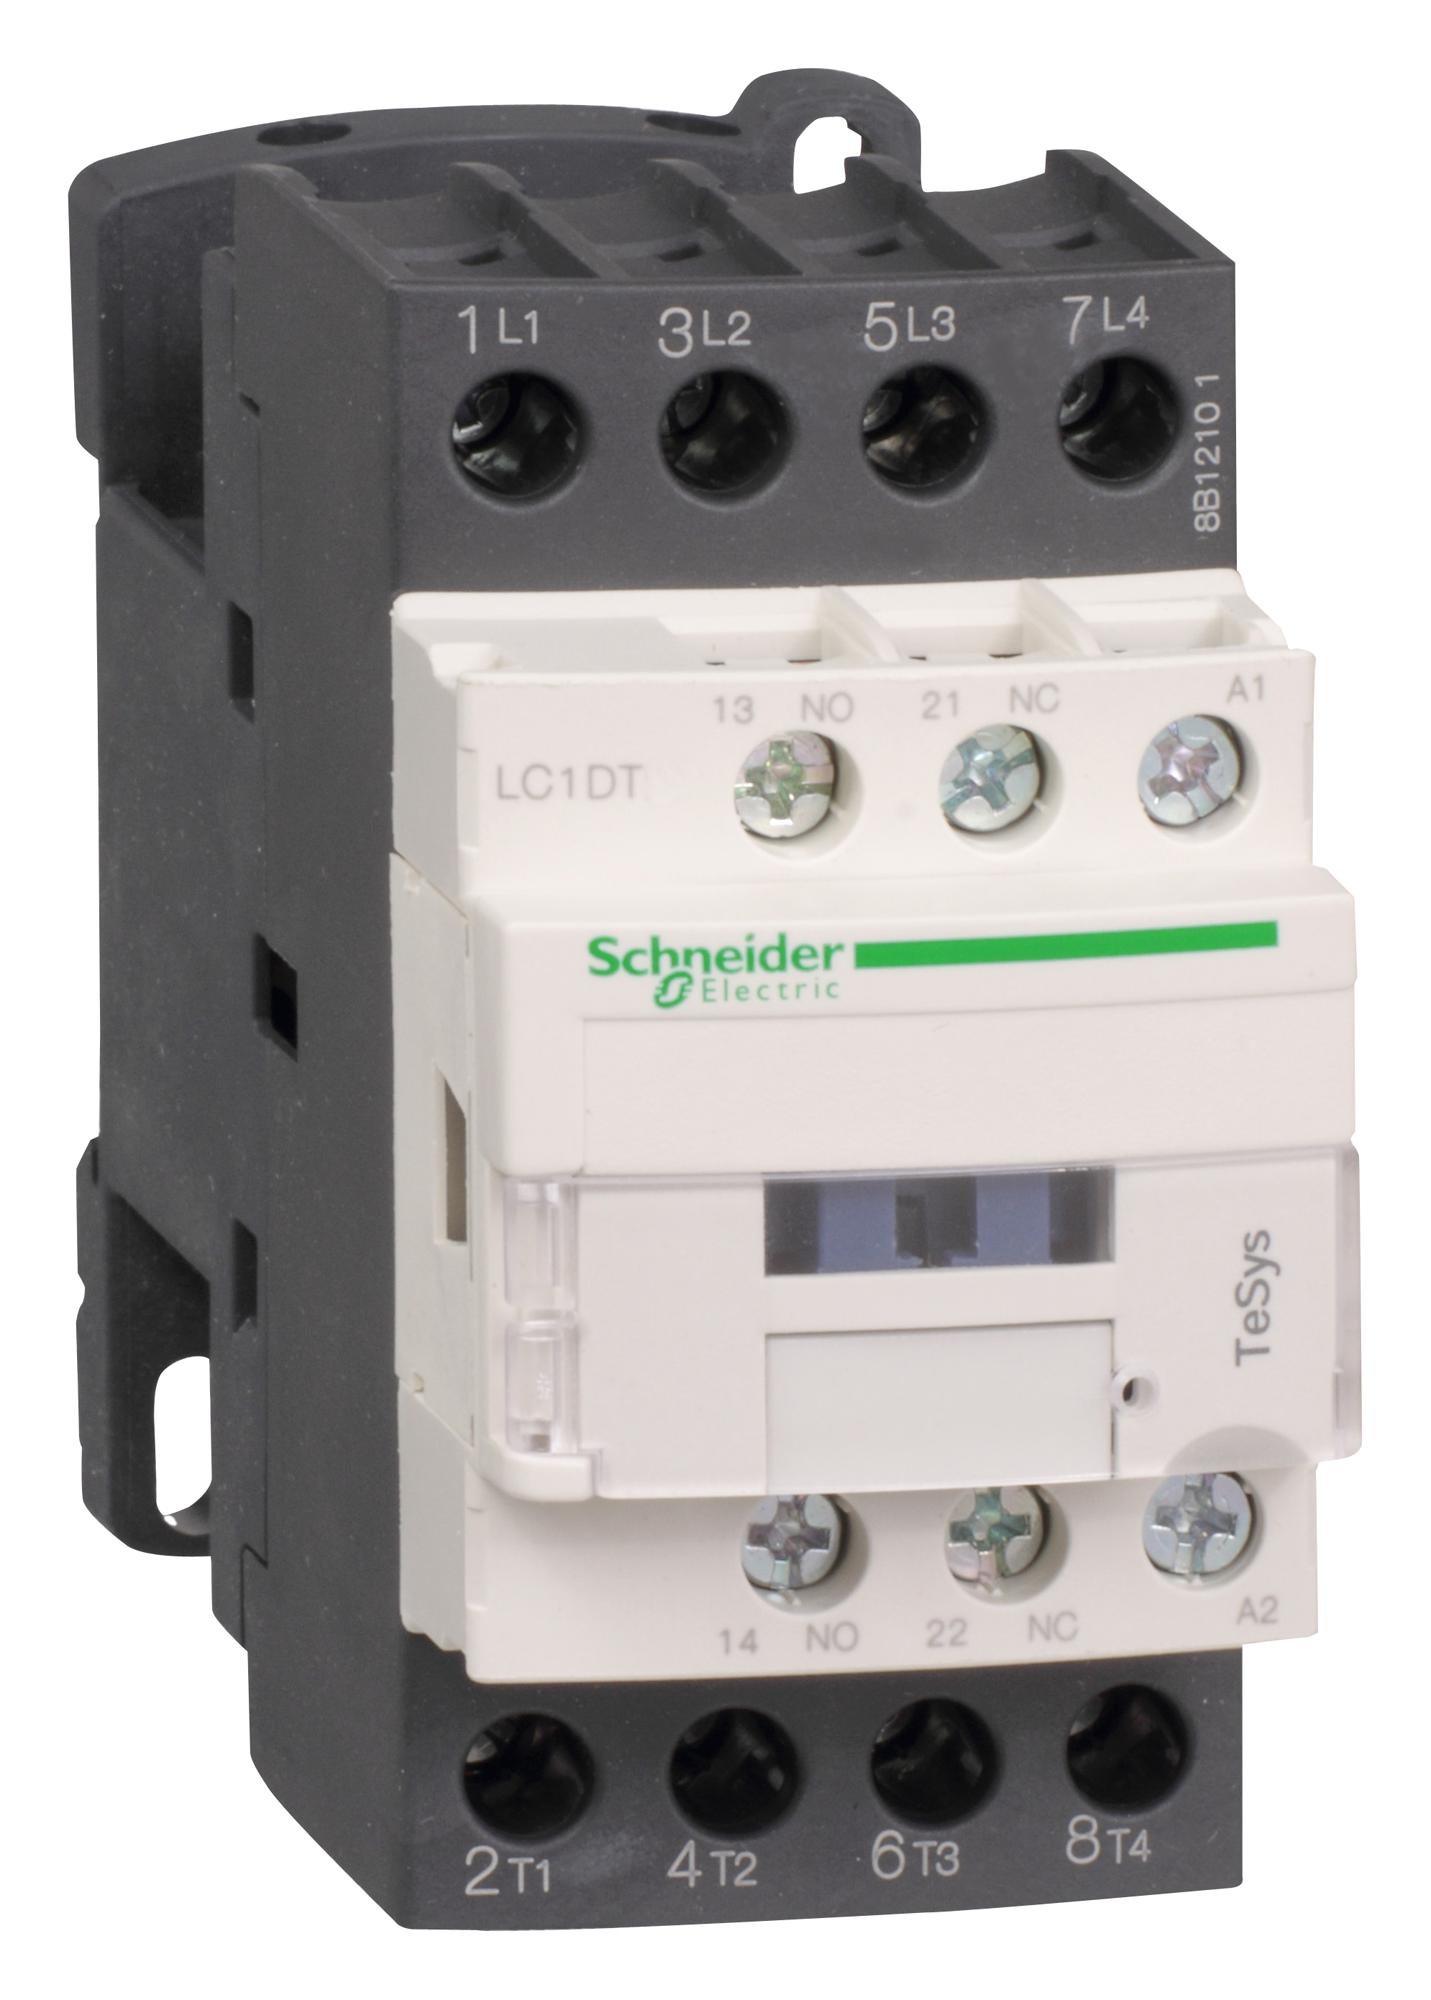 LC1DT32F7 CONTACTOR, 4PST-NO, 110V, DINRAIL/PANEL SCHNEIDER ELECTRIC